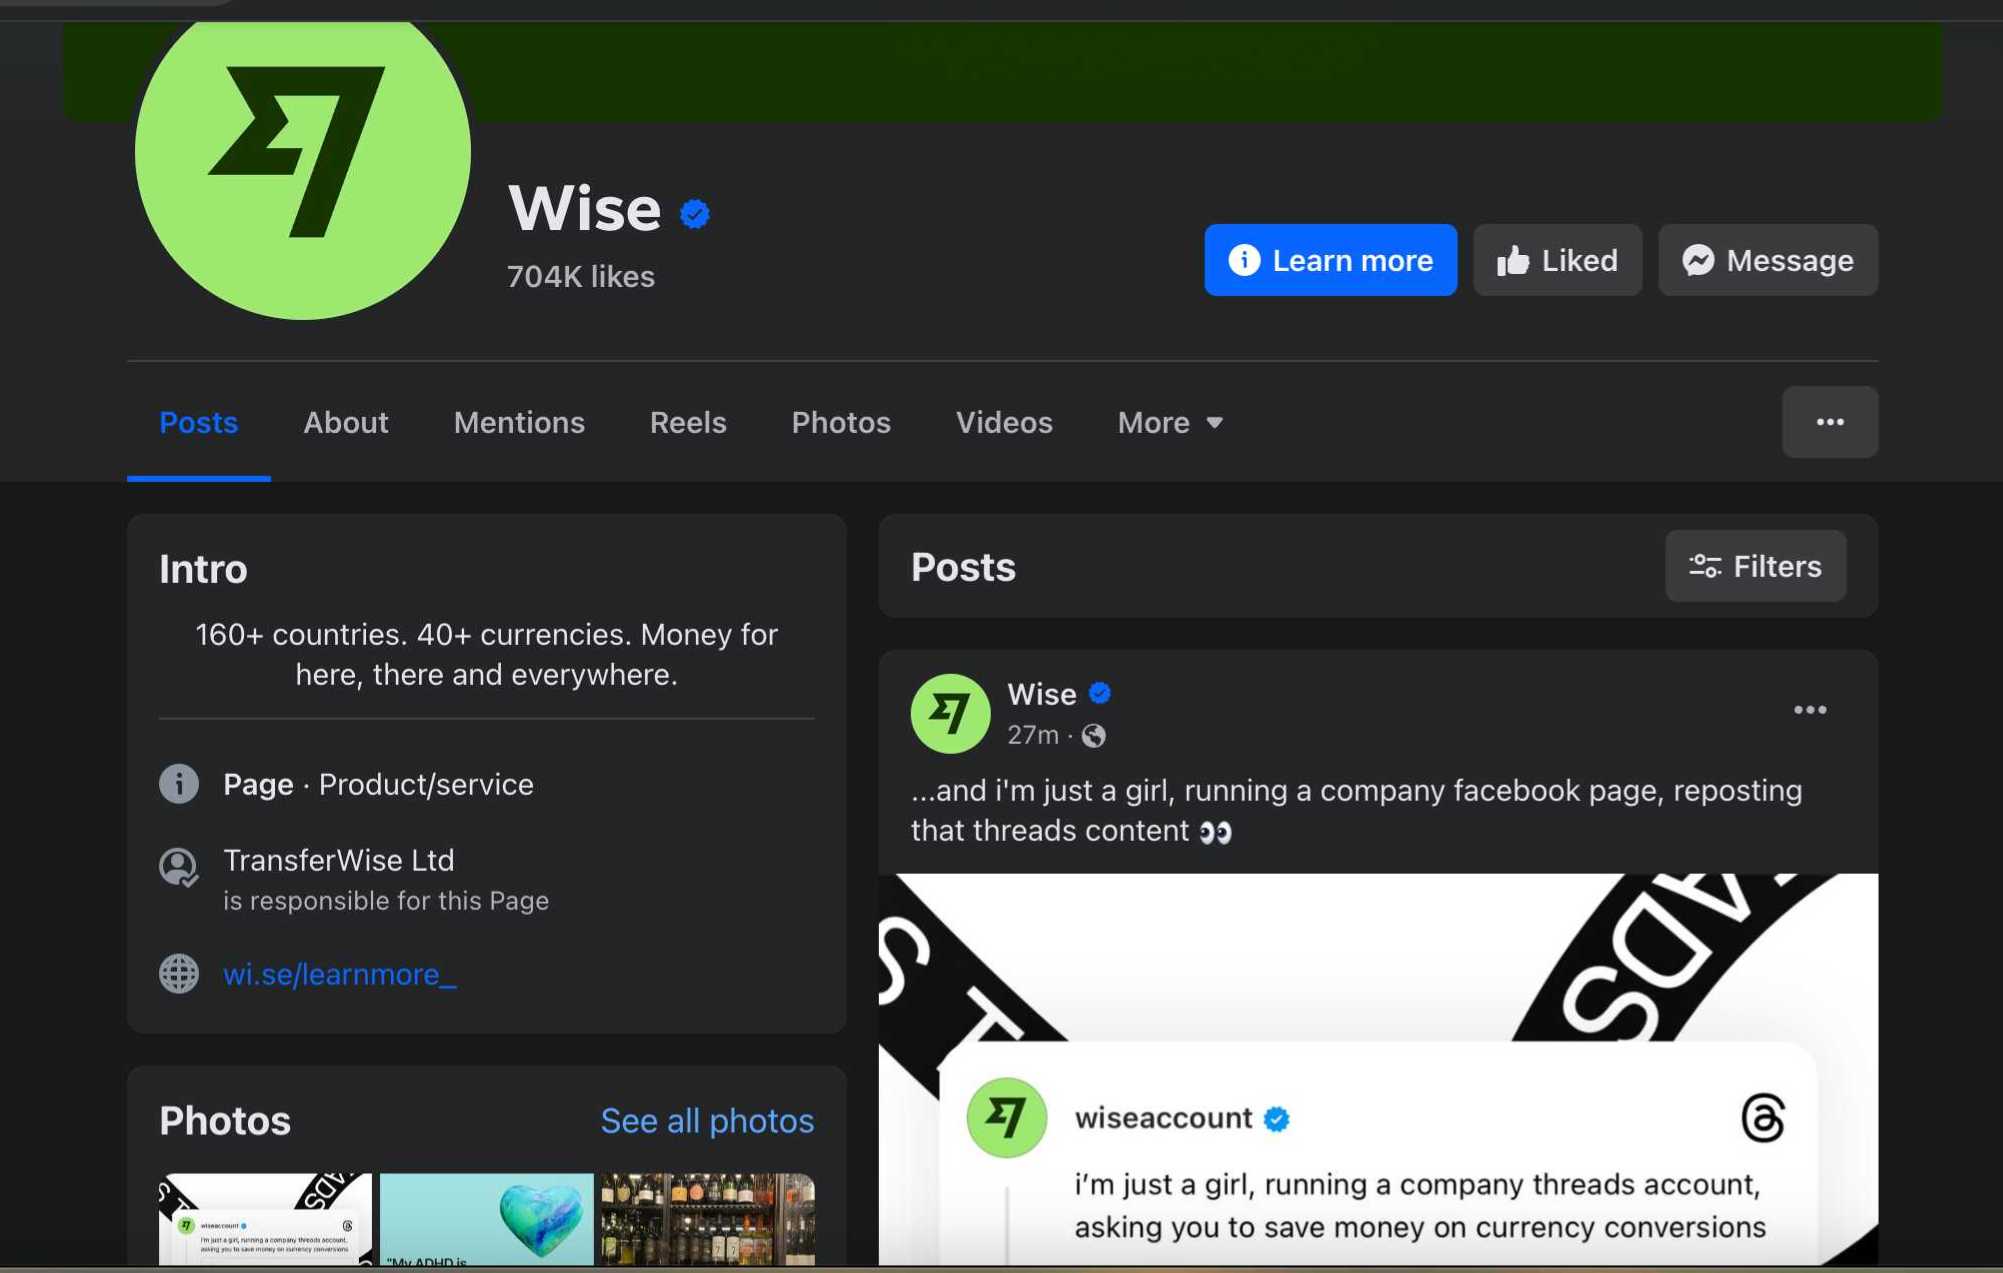 Wise has an excellent business page on Facebook, with over 700k followers at the time of writing.